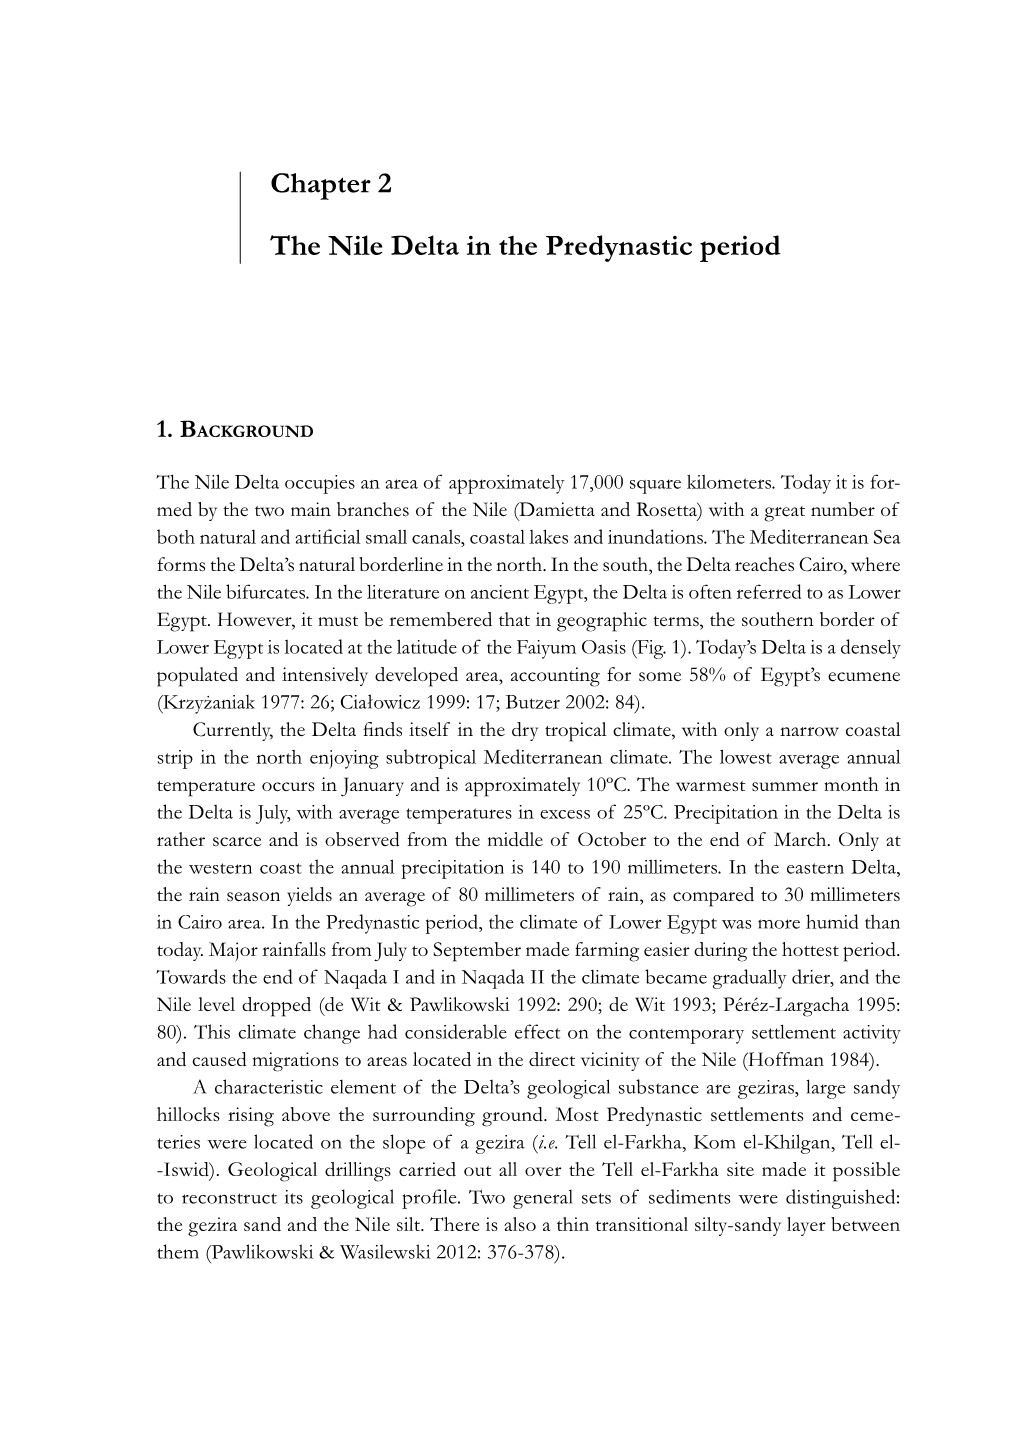 Chapter 2 the Nile Delta in the Predynastic Period 49